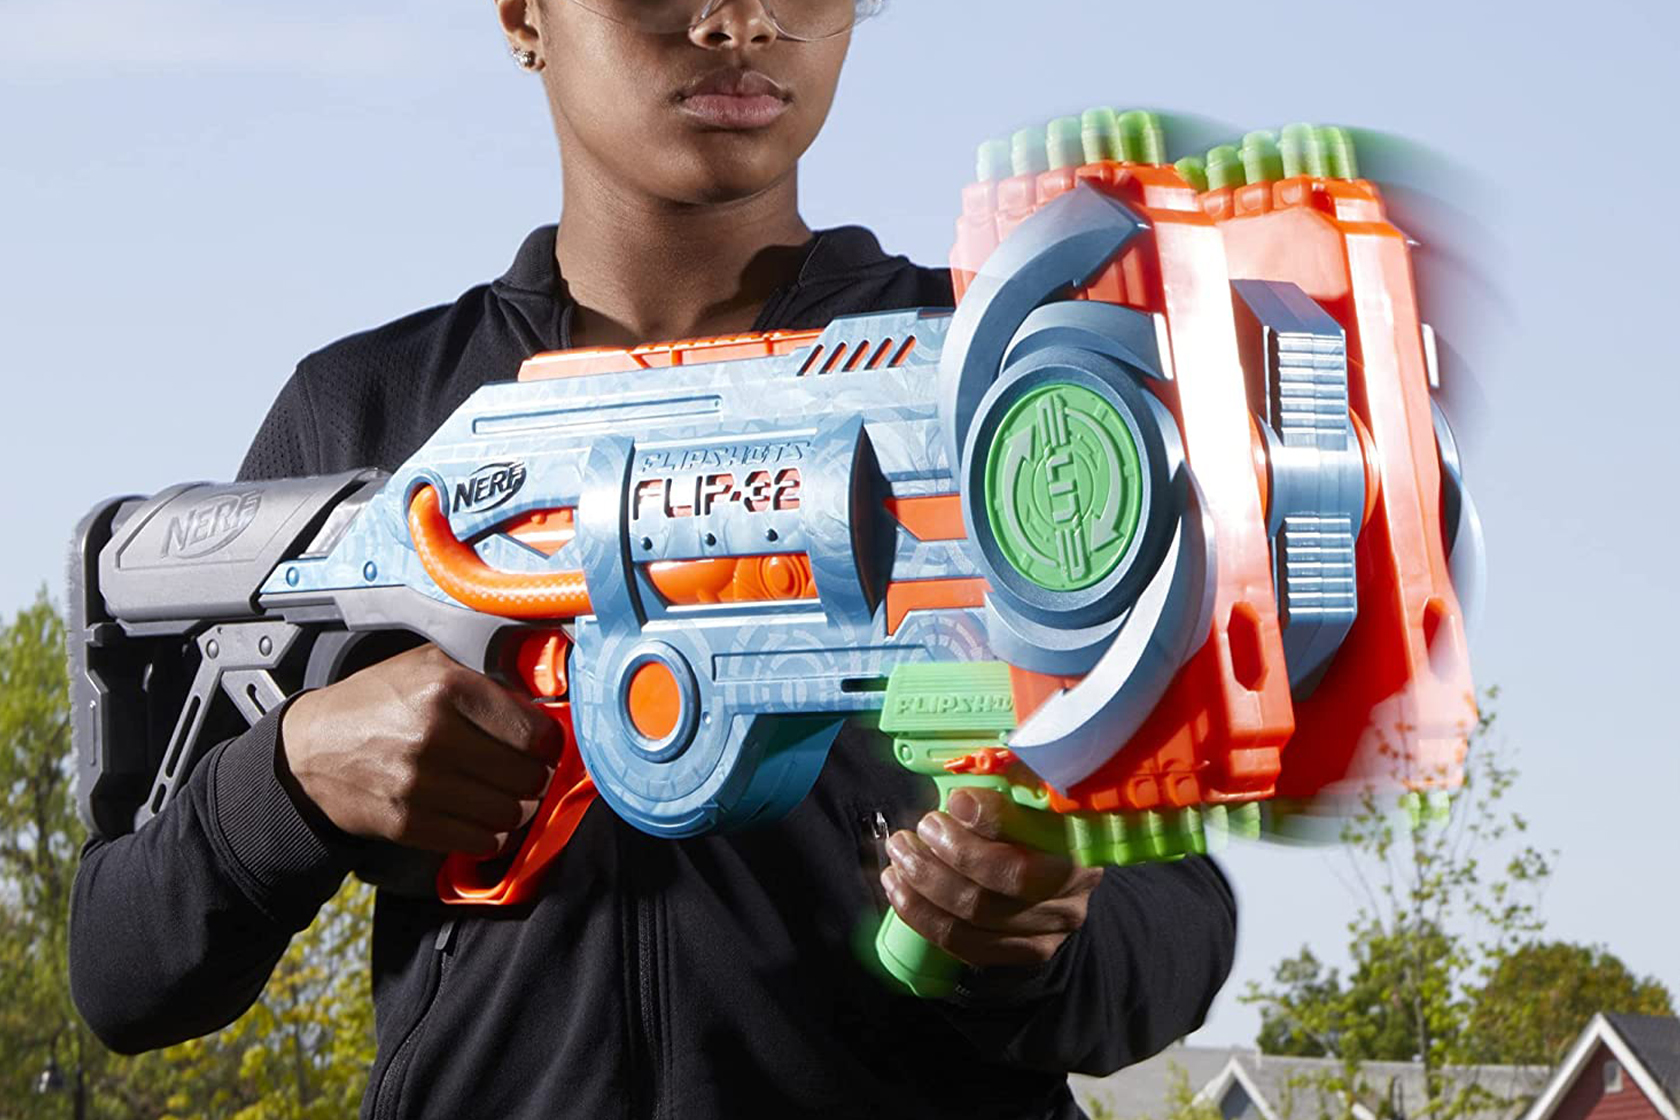 moden picnic Afhængighed Shoot your shot with up to 67% off Nerf guns